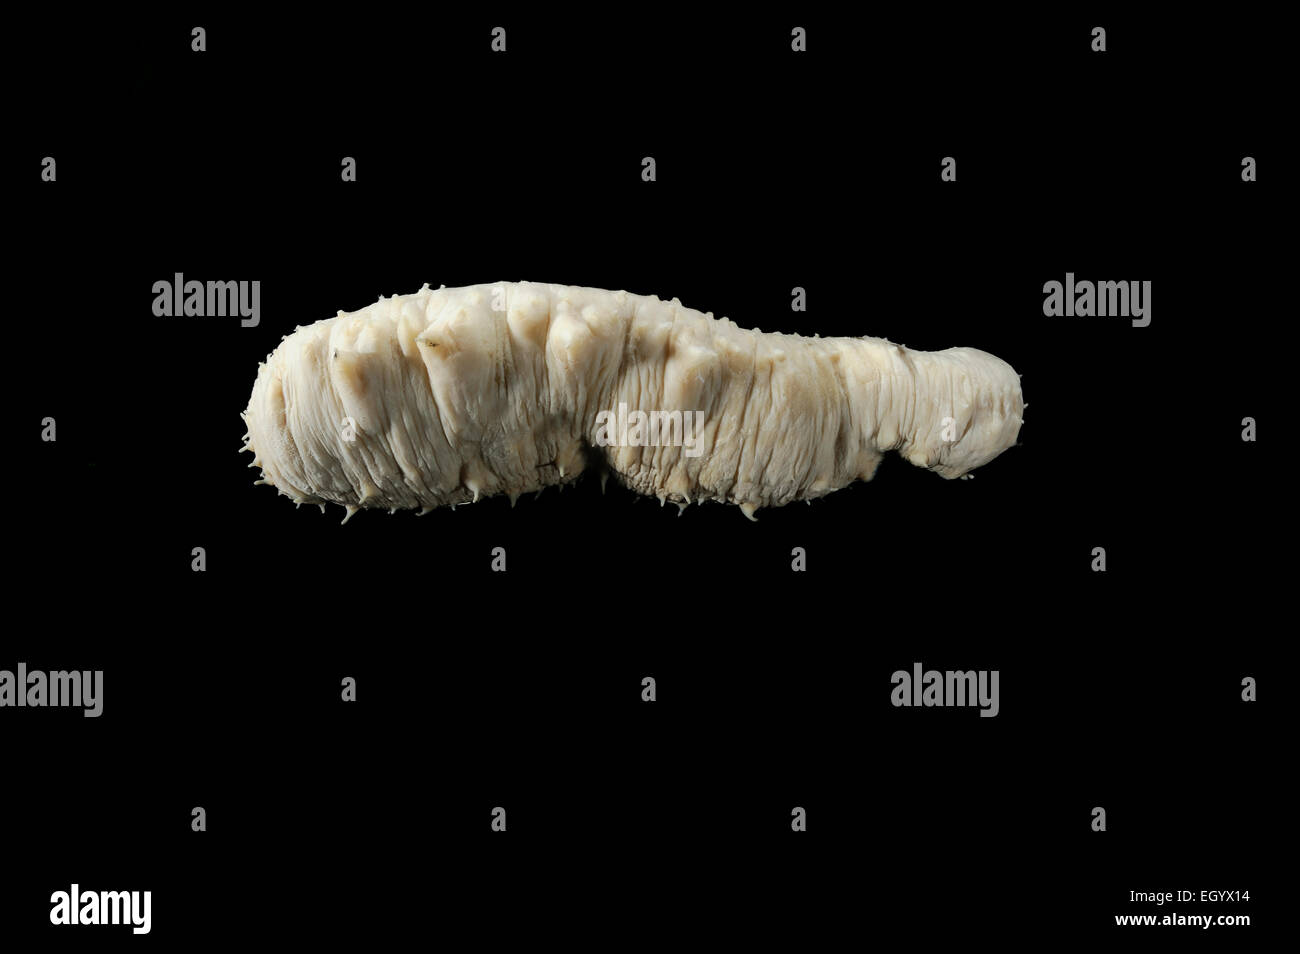 Sea Cucumber (Mesothuria (Allantis) intestinalis) Picture was taken in cooperation with the Zoological Museum University of Hamb Stock Photo